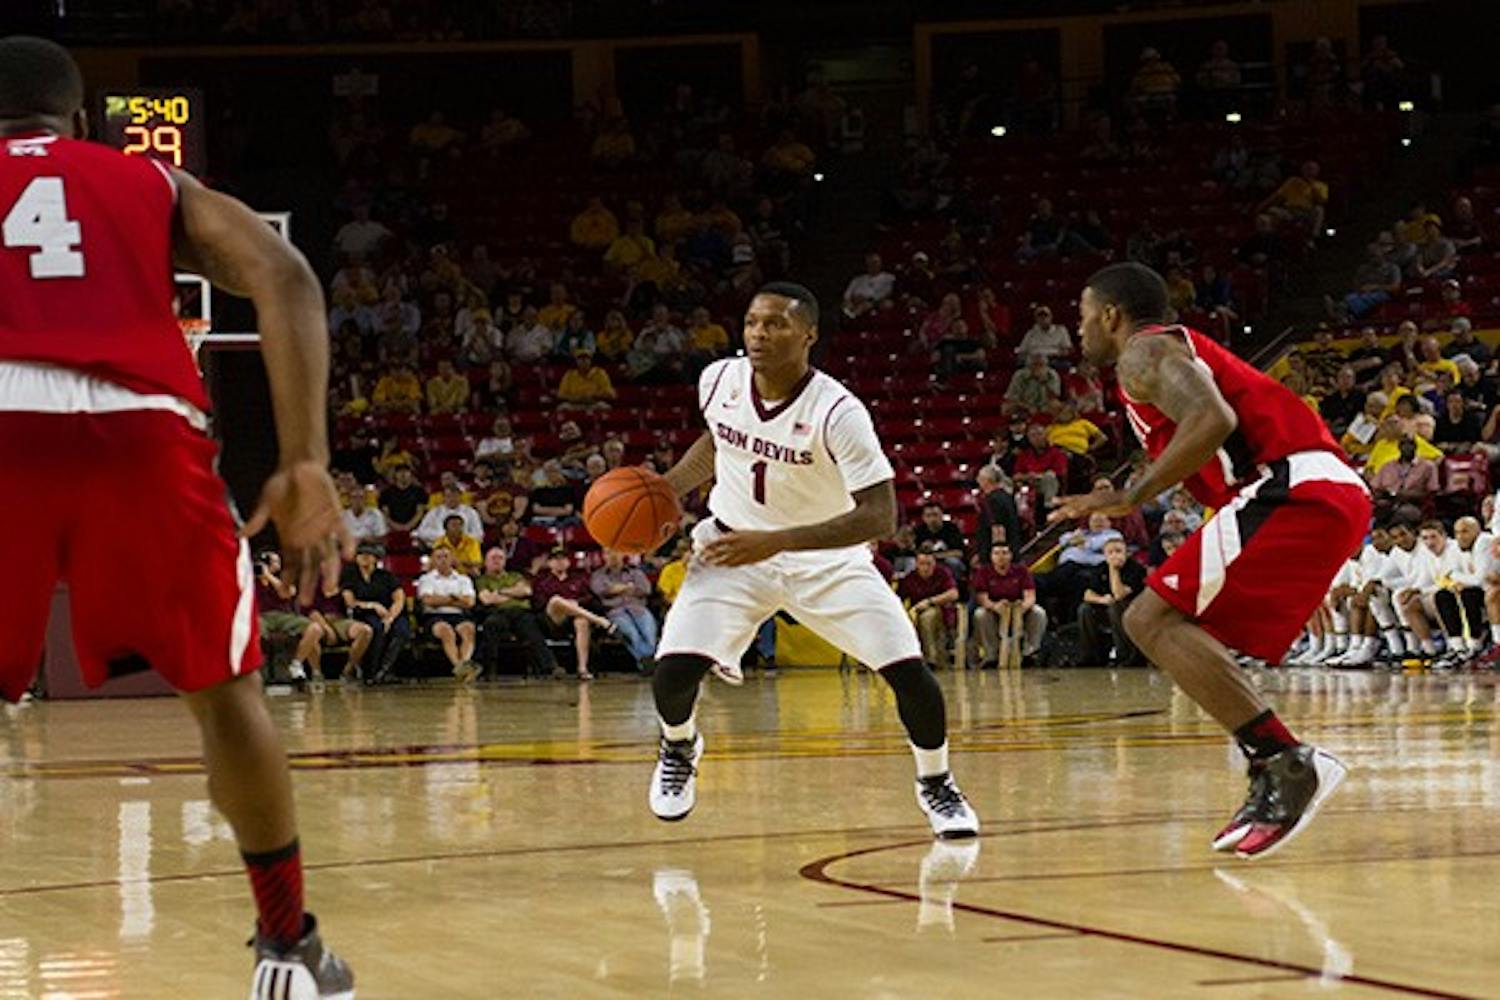 Sophomore guard Jahii Carson dribbles the ball up the court between defenders against Miami (Ohio). The Sun Devils won 94-50. (Phoot by Vince Dwyyer)